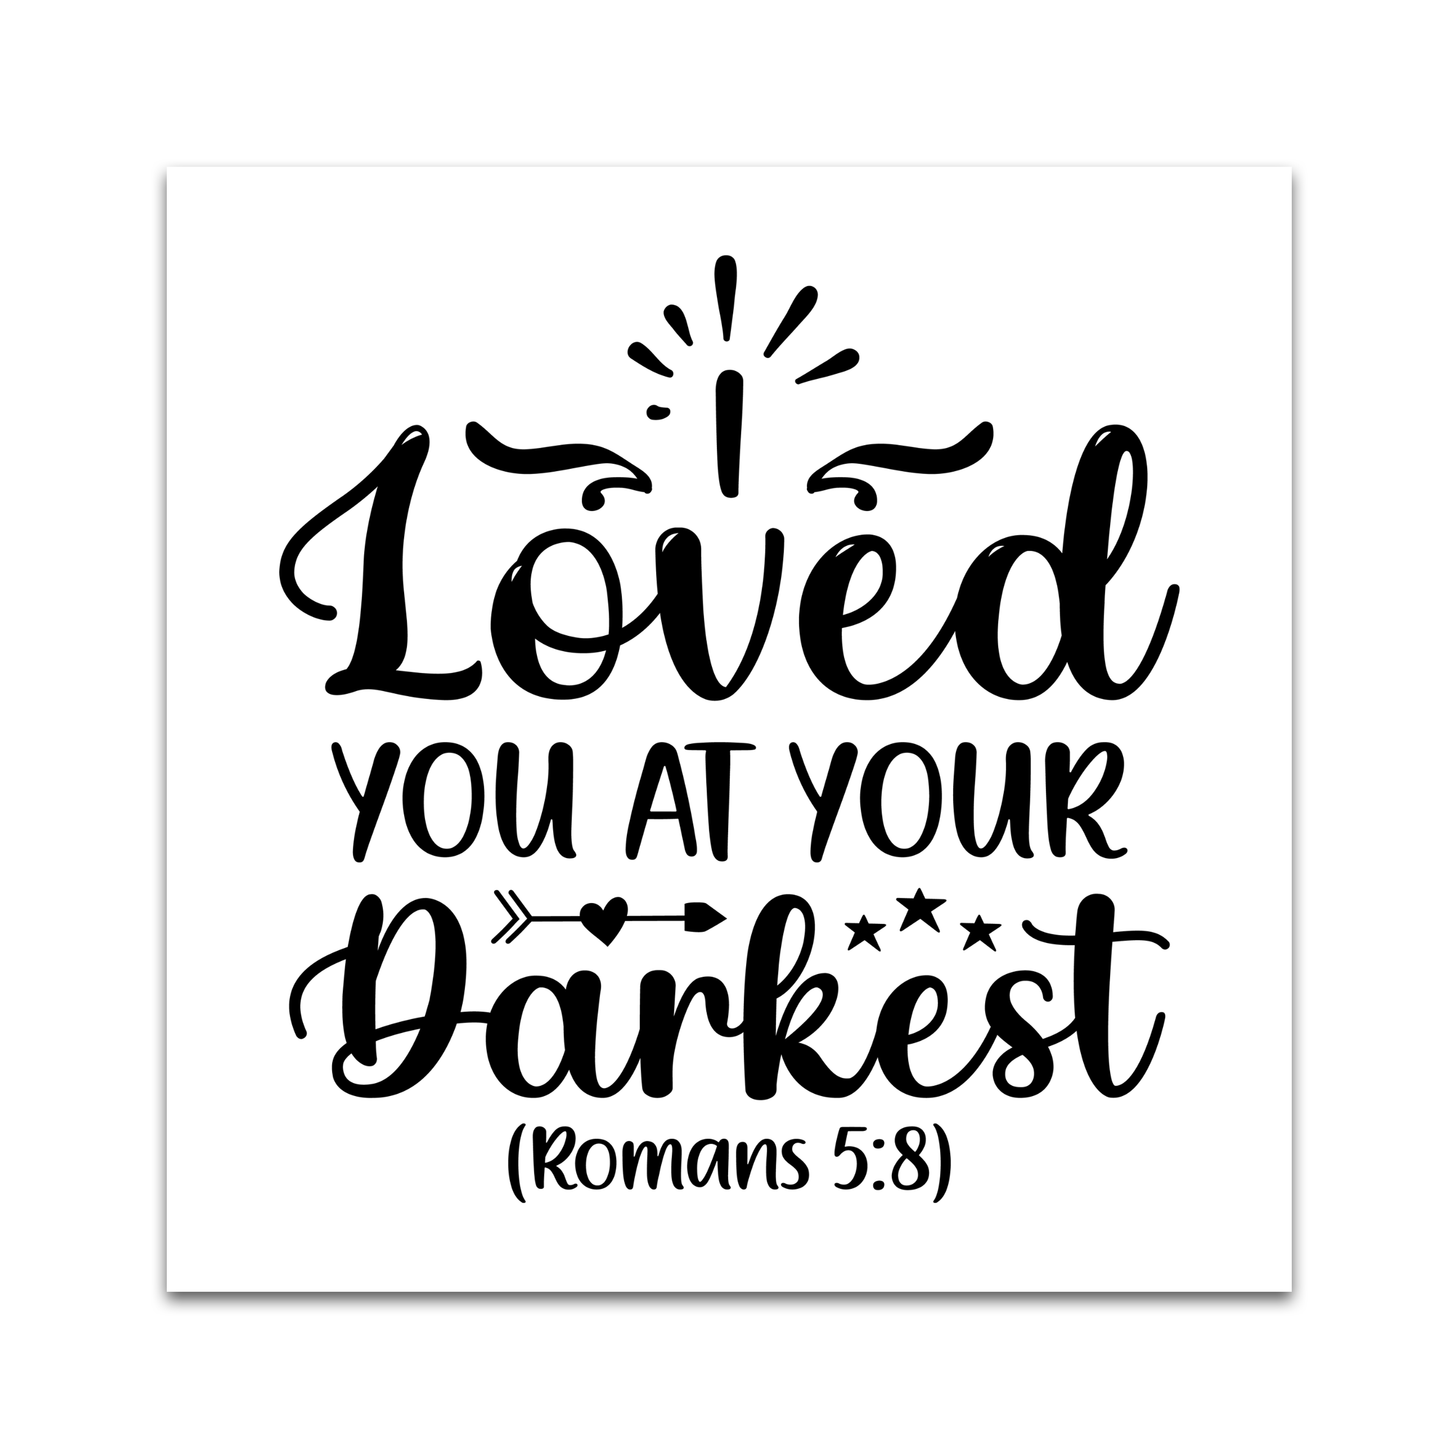 Precut Bible Quilt Square - I Loved You At Your Darkest, Romans 5:8